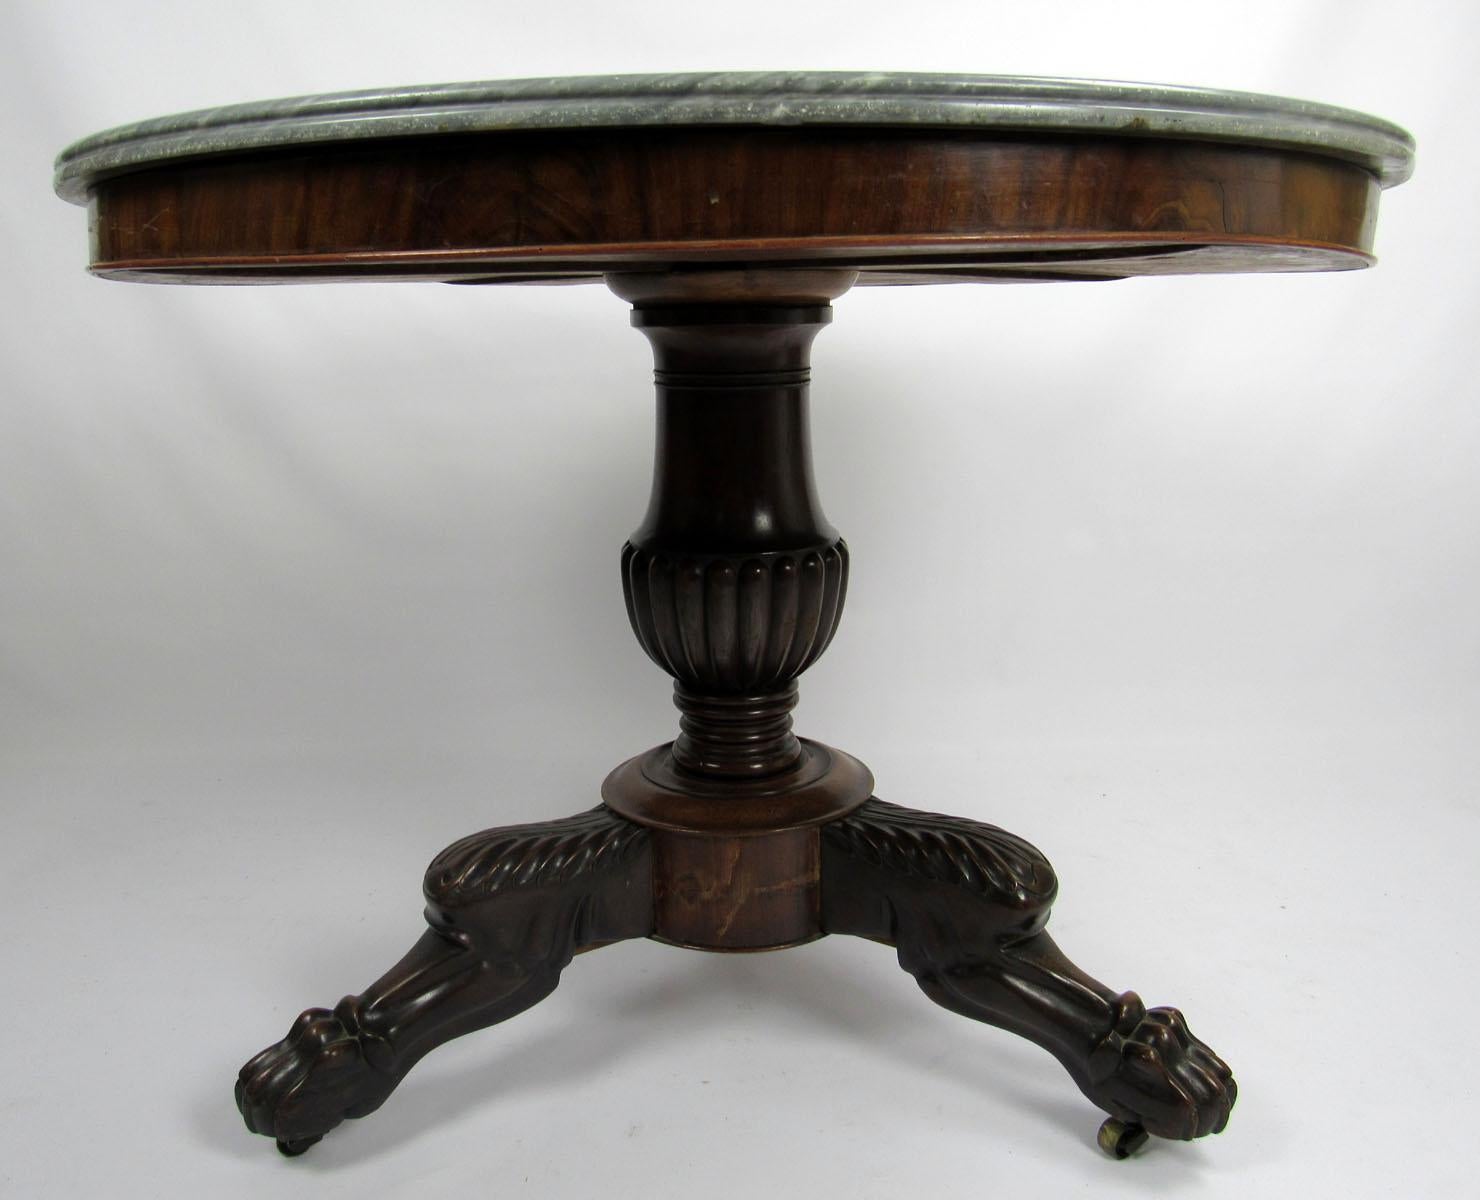 Restauration period, Bleu Turquin marble top gueridon table with carved griffon feet. Beautiful Bleu Turquin marble is hand-cut and molded on the surface to create a natural border